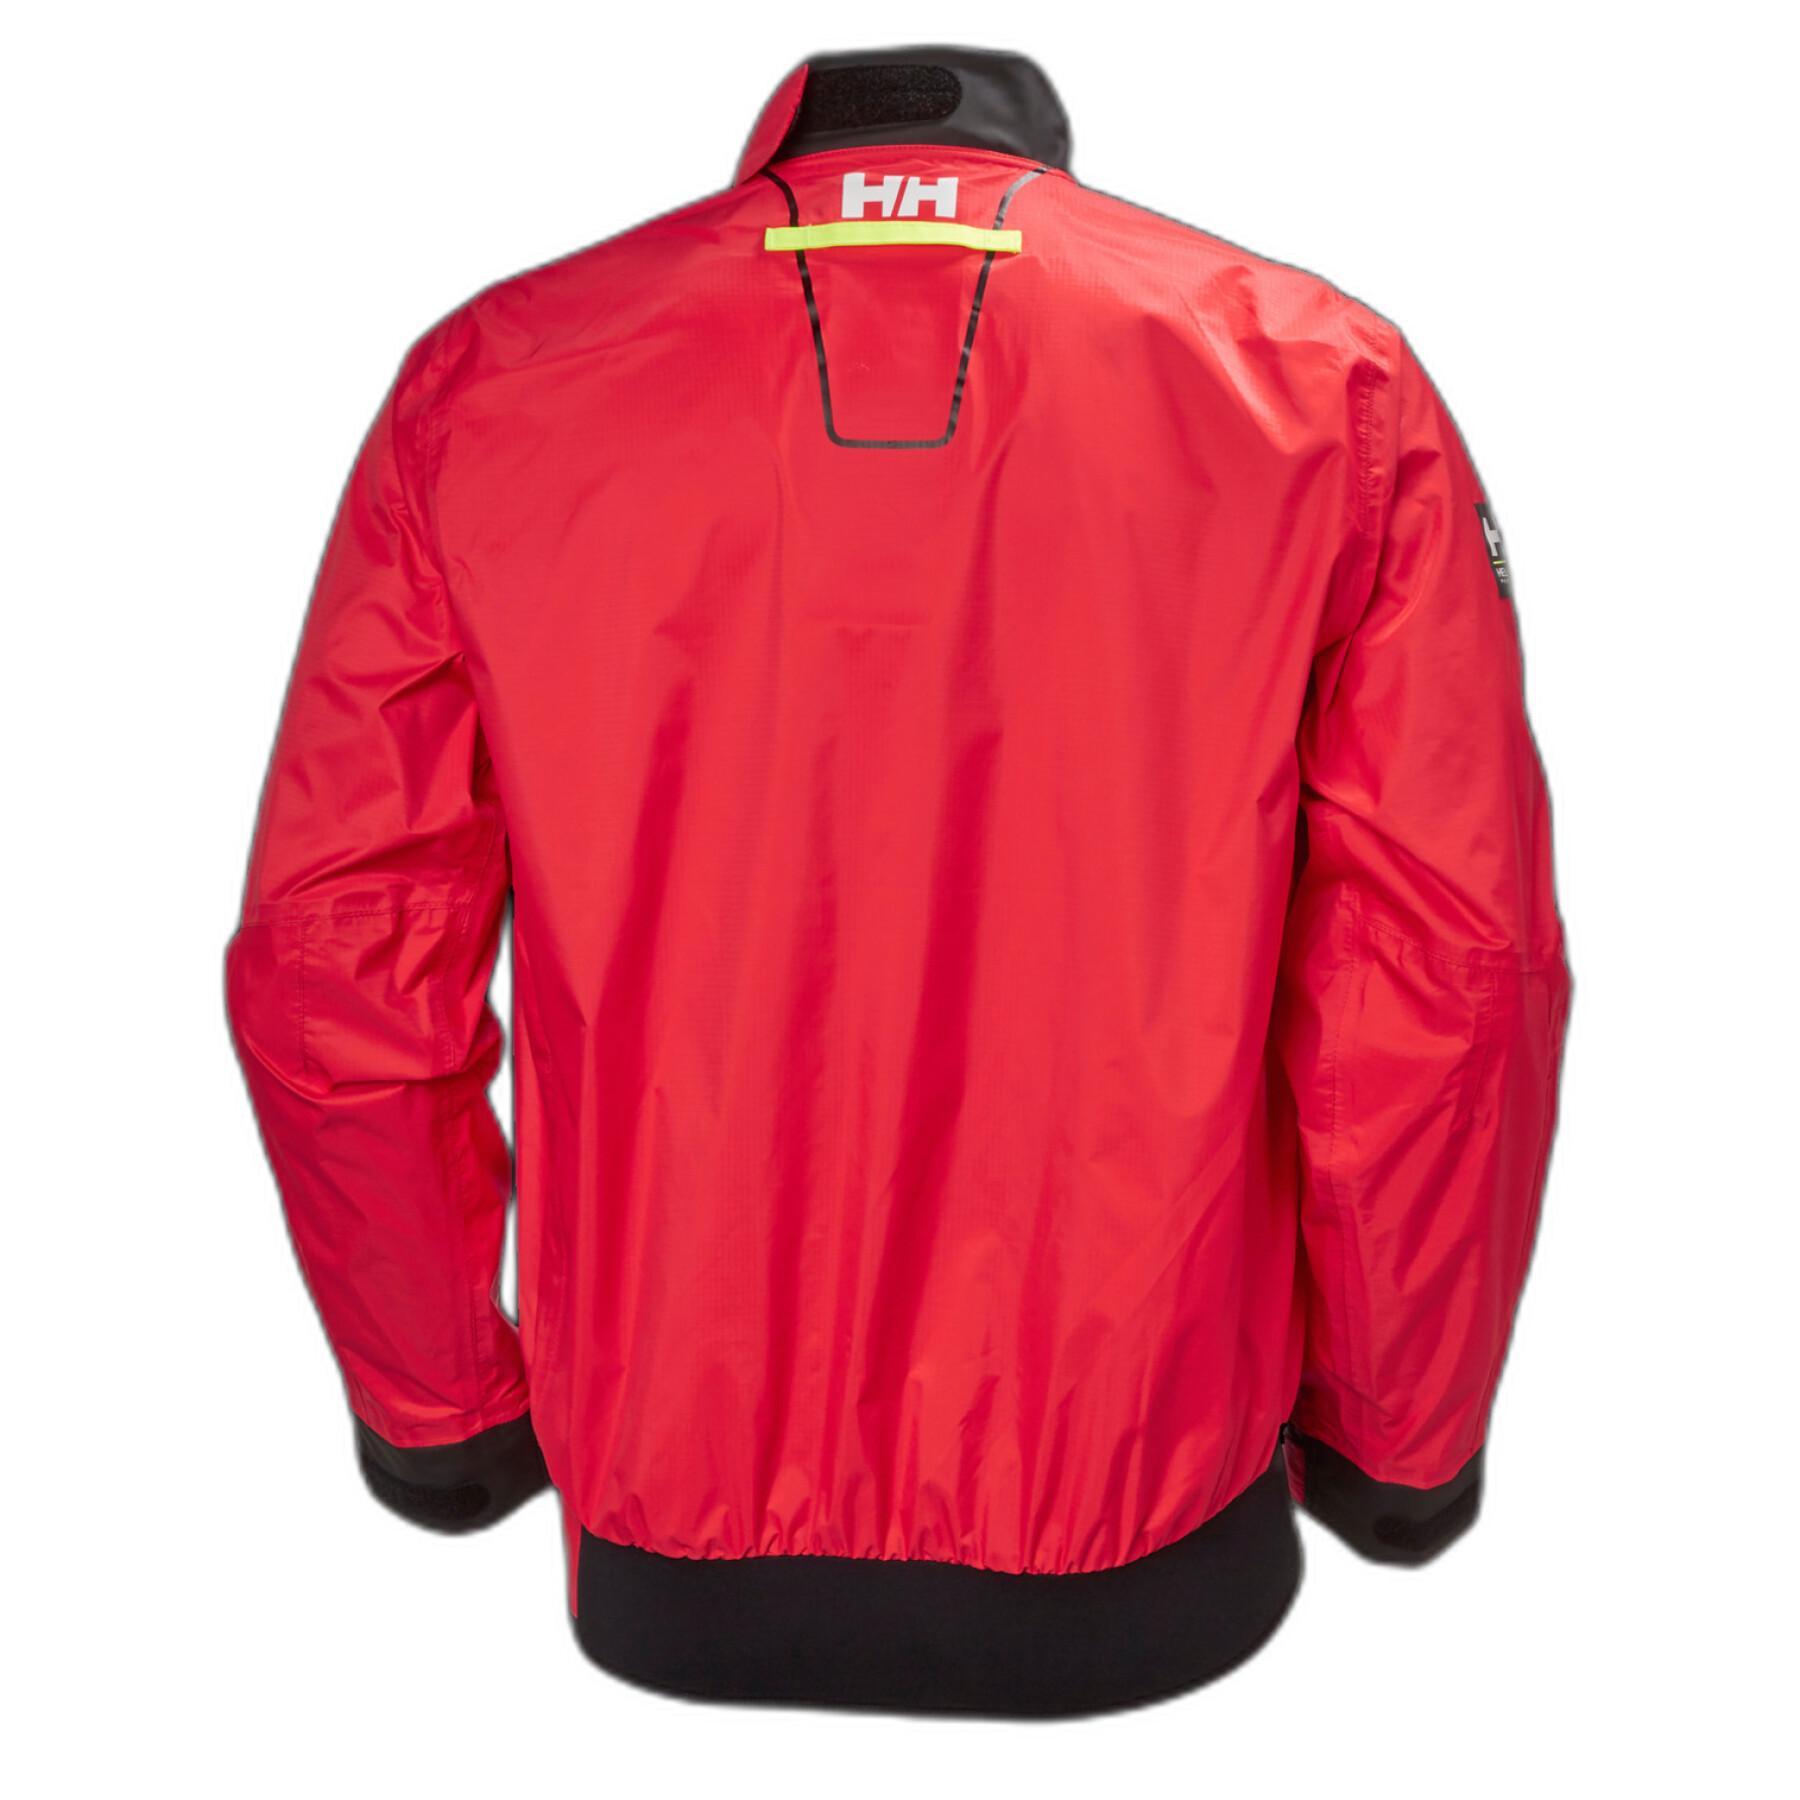 Chaqueta impermeable Helly Hansen HP Smock Top